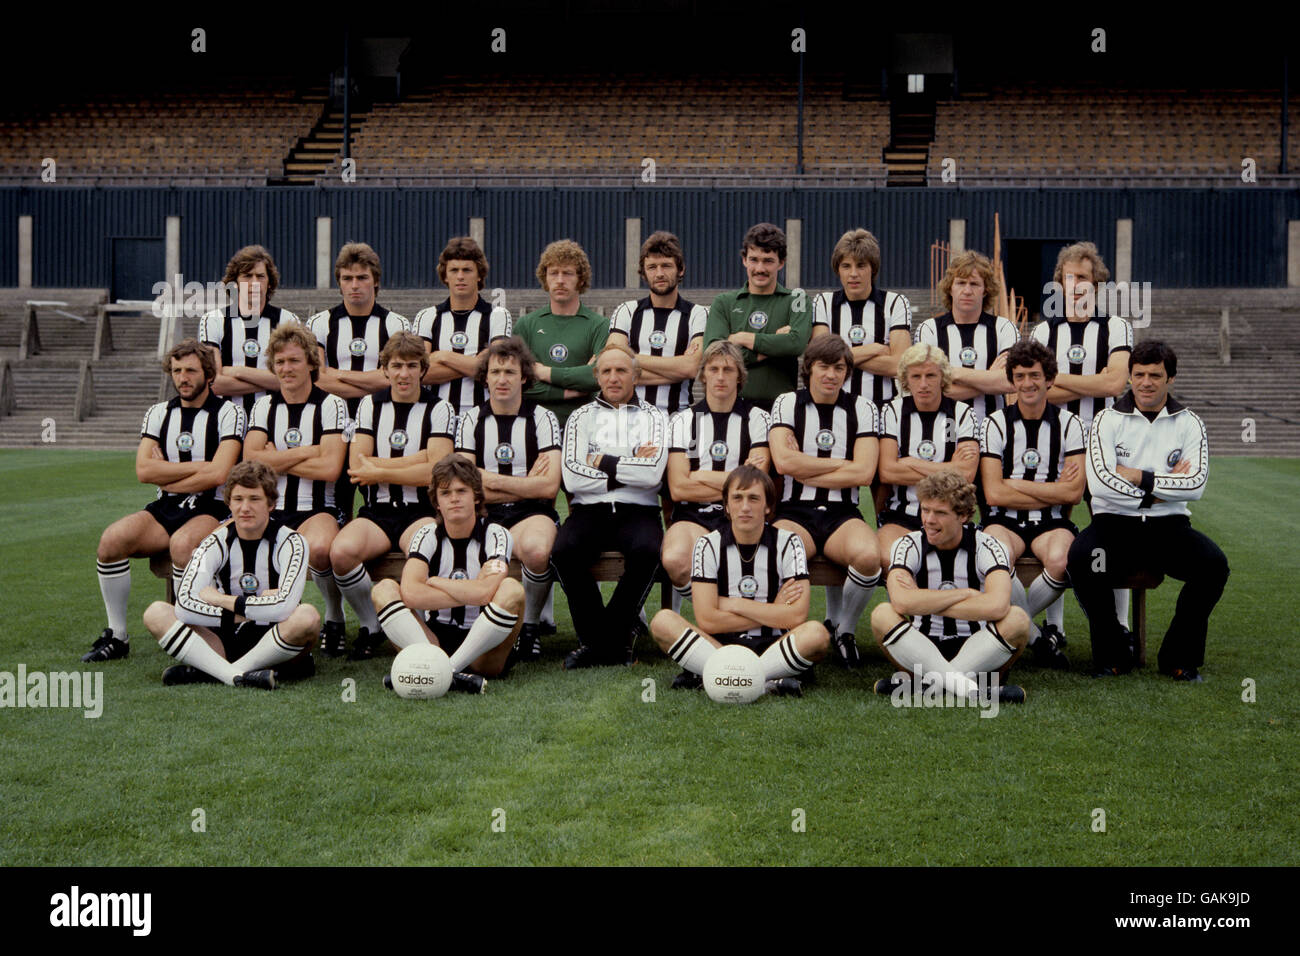 Newcastle United squad 1978-79: (back row, l-r) Ralph Callachan, Micky Barker, Andy Parkinson, Mike Mahoney, John Bird, Kevin Carr, David Barton, John Blackley, John Connolly; (middle row, l-r) Alan Kennedy, Ken Mitchell, Mark McGhee, Tommy Cassidy, manager Bill McGarry, Mike Larnach, Irving Nattrass, Peter Kelly, Terry Hibbitt, assistant manager Peter Morris; (front row, l-r) Alan Guy, Nigel Walker, Jamie Scott, Ray Blackhall Stock Photo